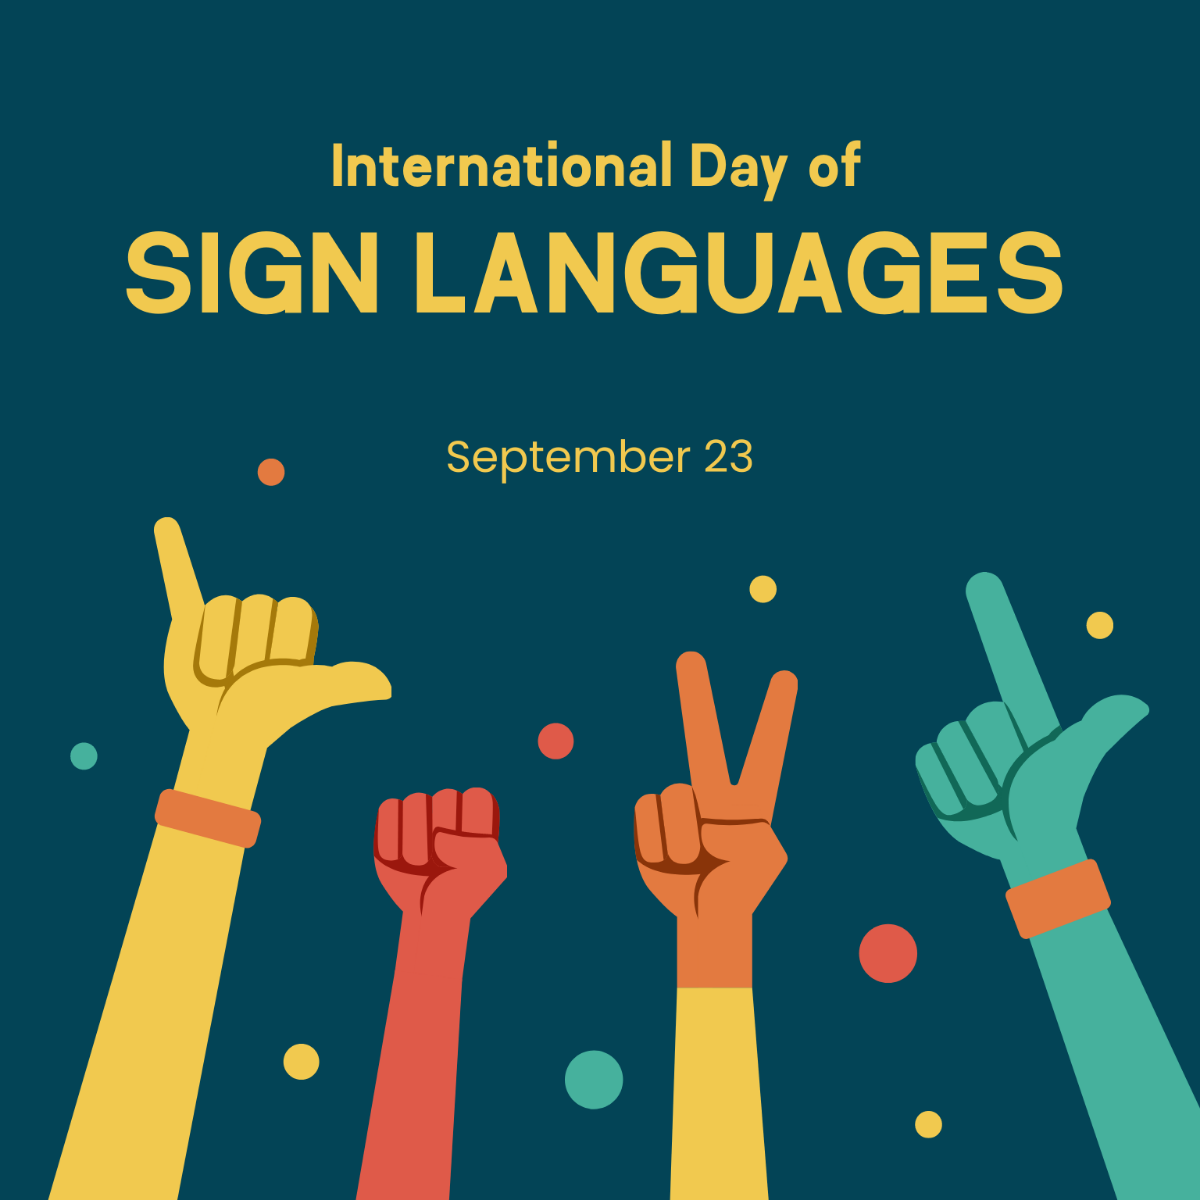 International Day of Sign Languages Flyer Vector